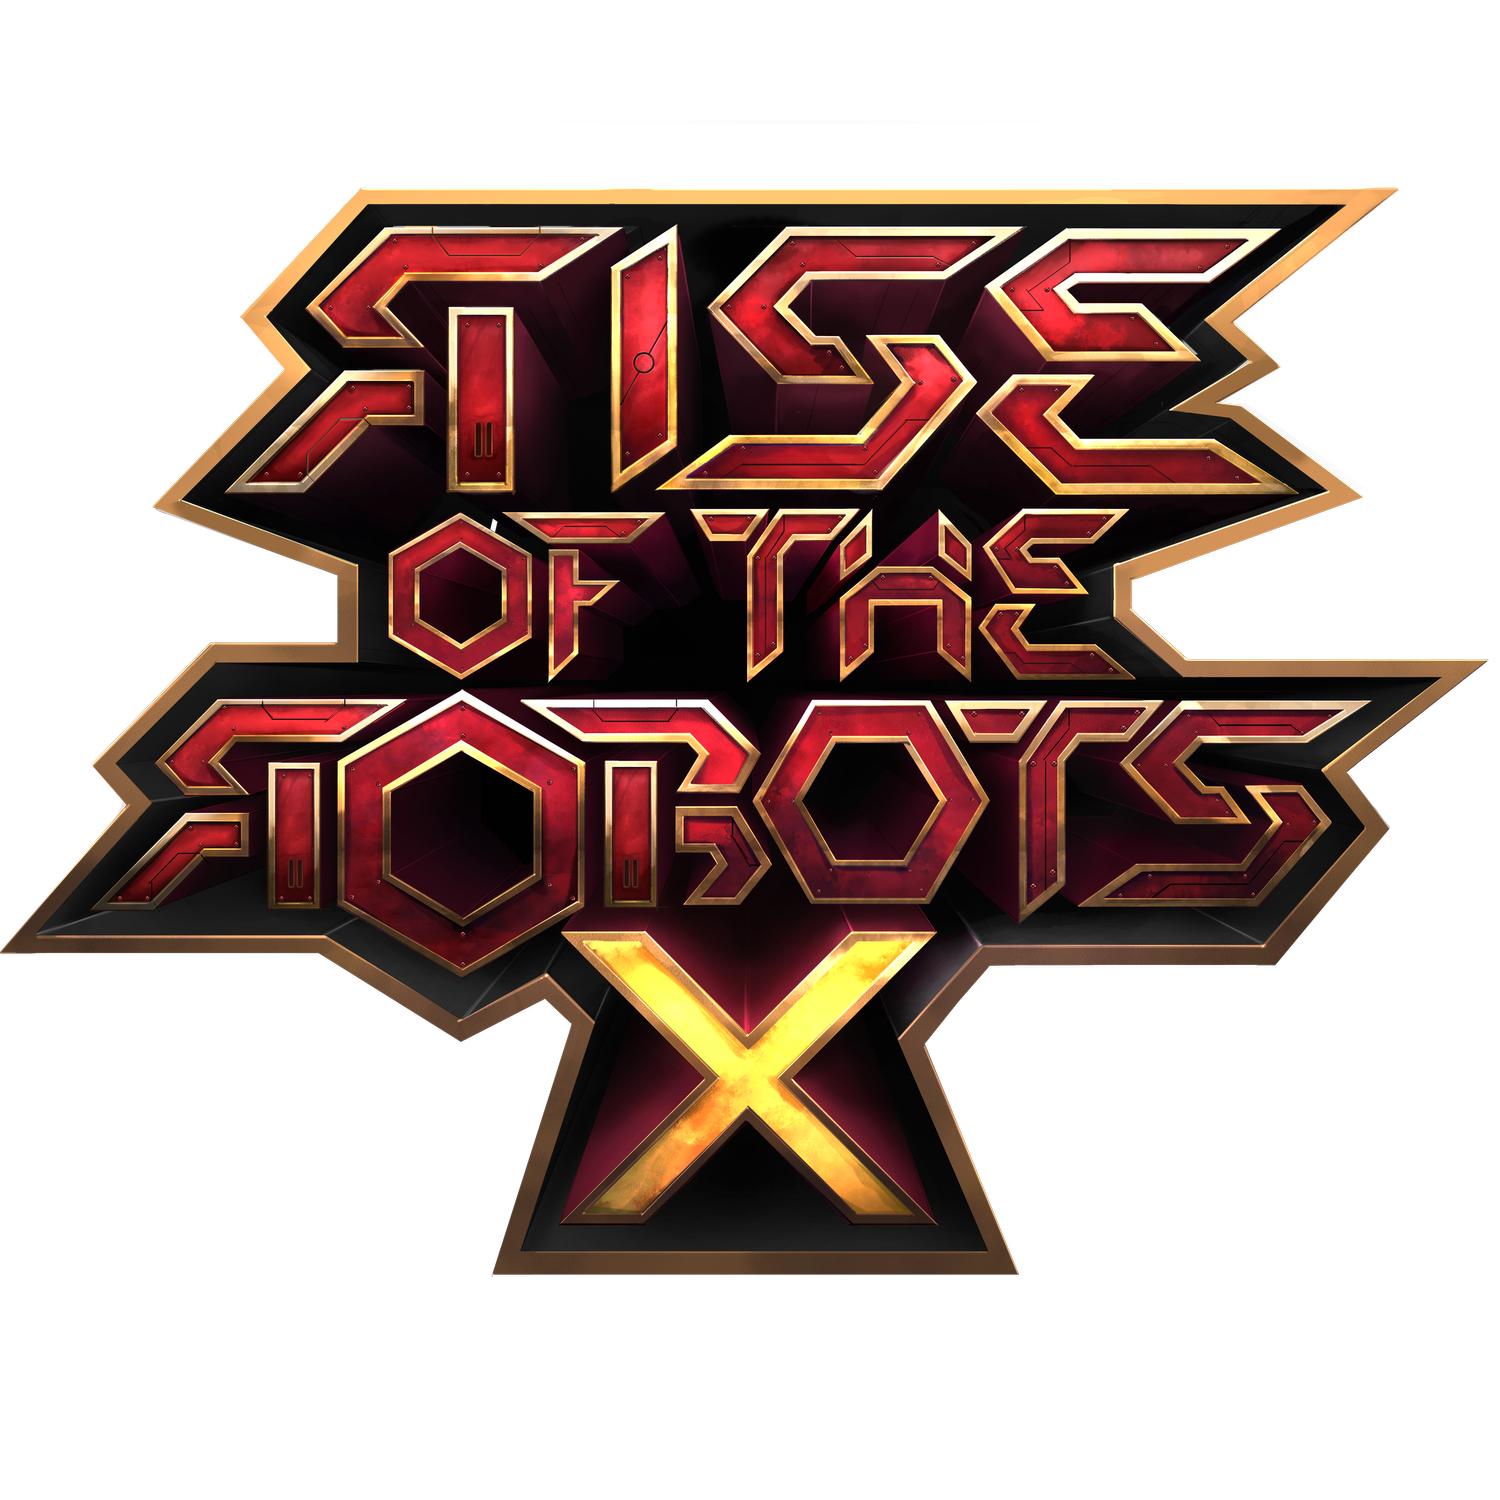 Rise of the Robots X